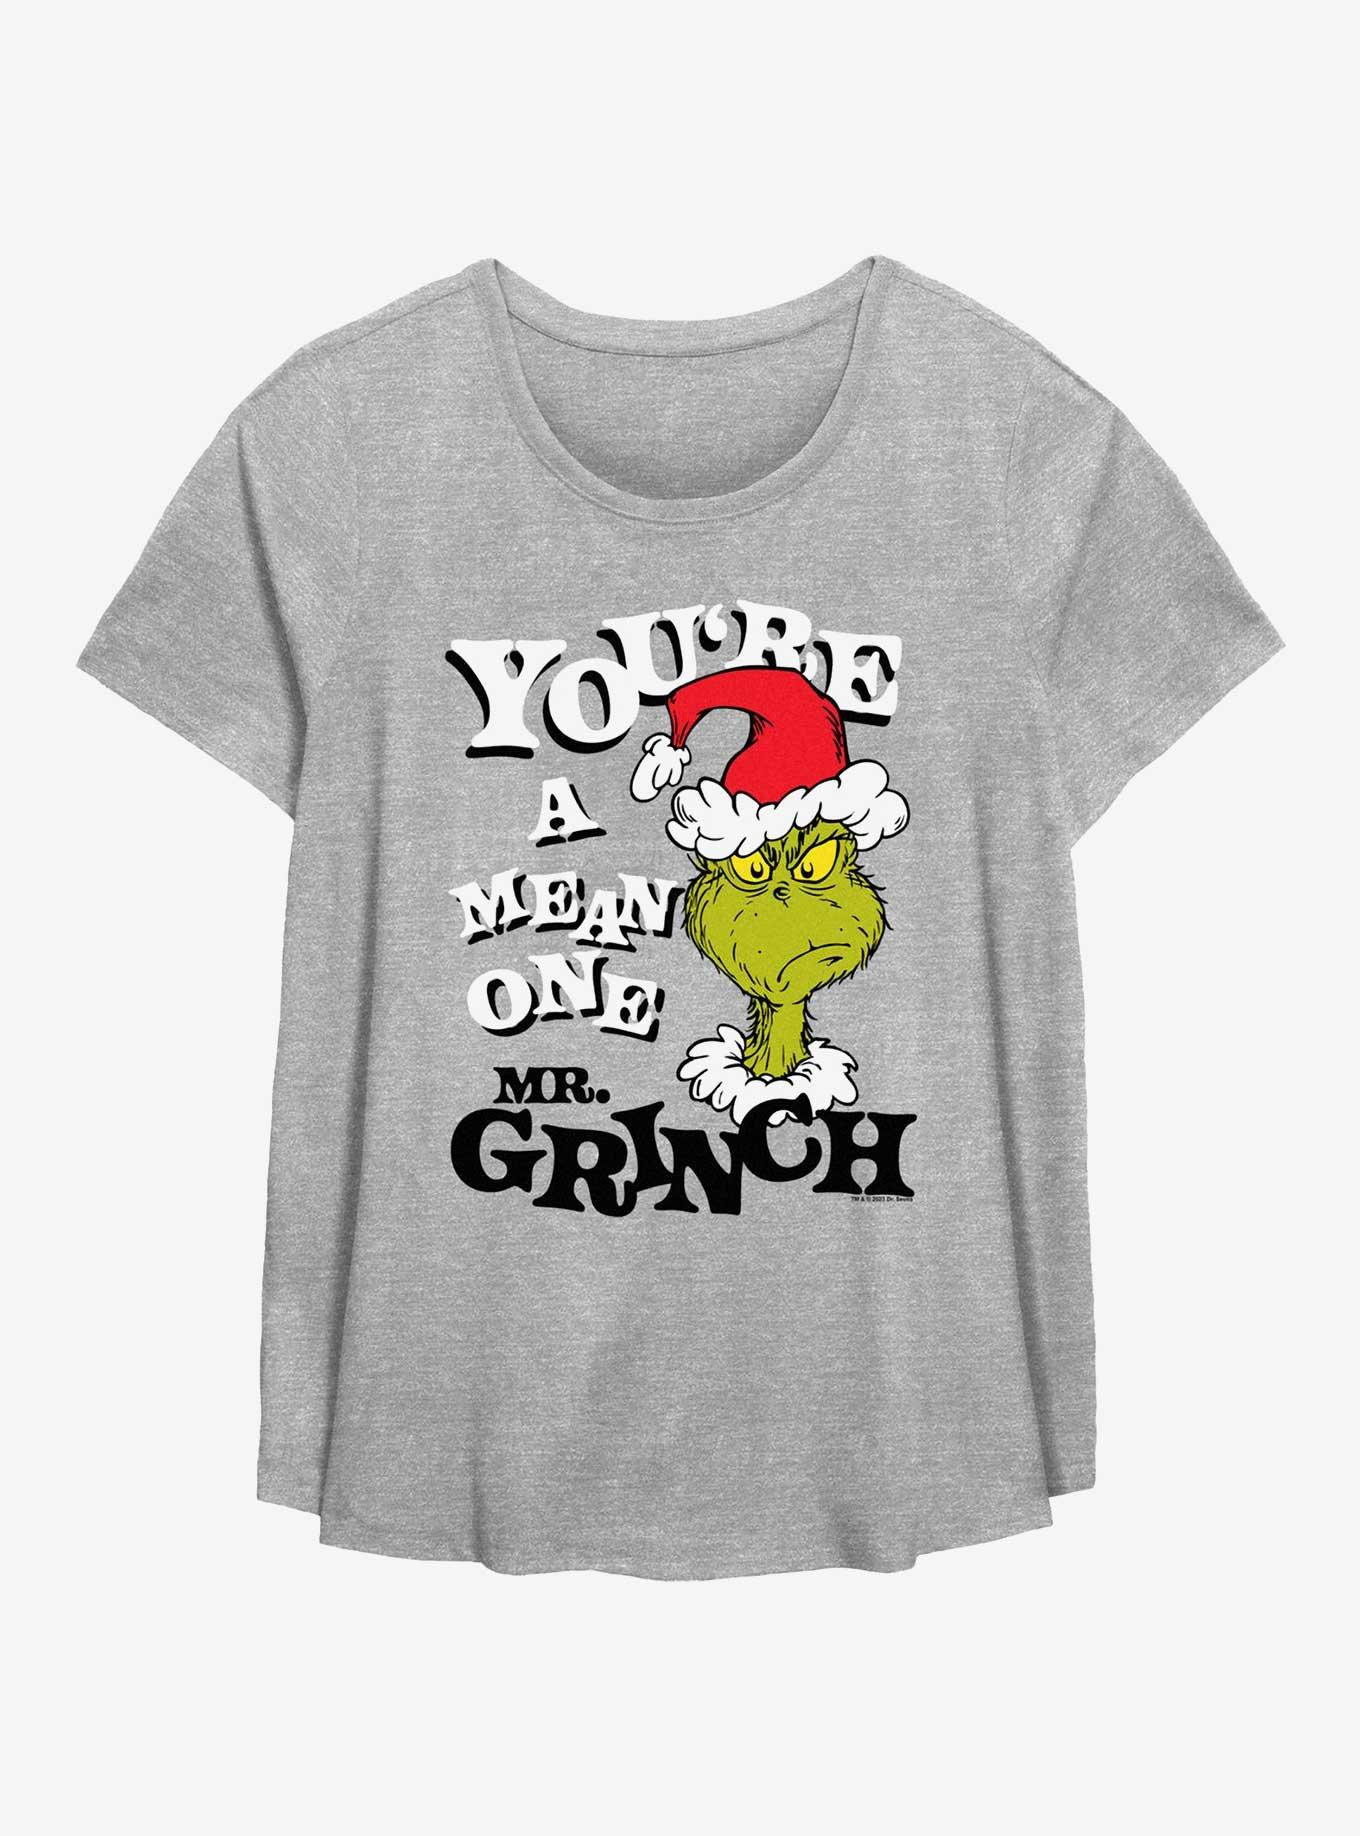 Dr. Seuss How The Grinch Stole Christmas Mean One Girls T-Shirt Plus